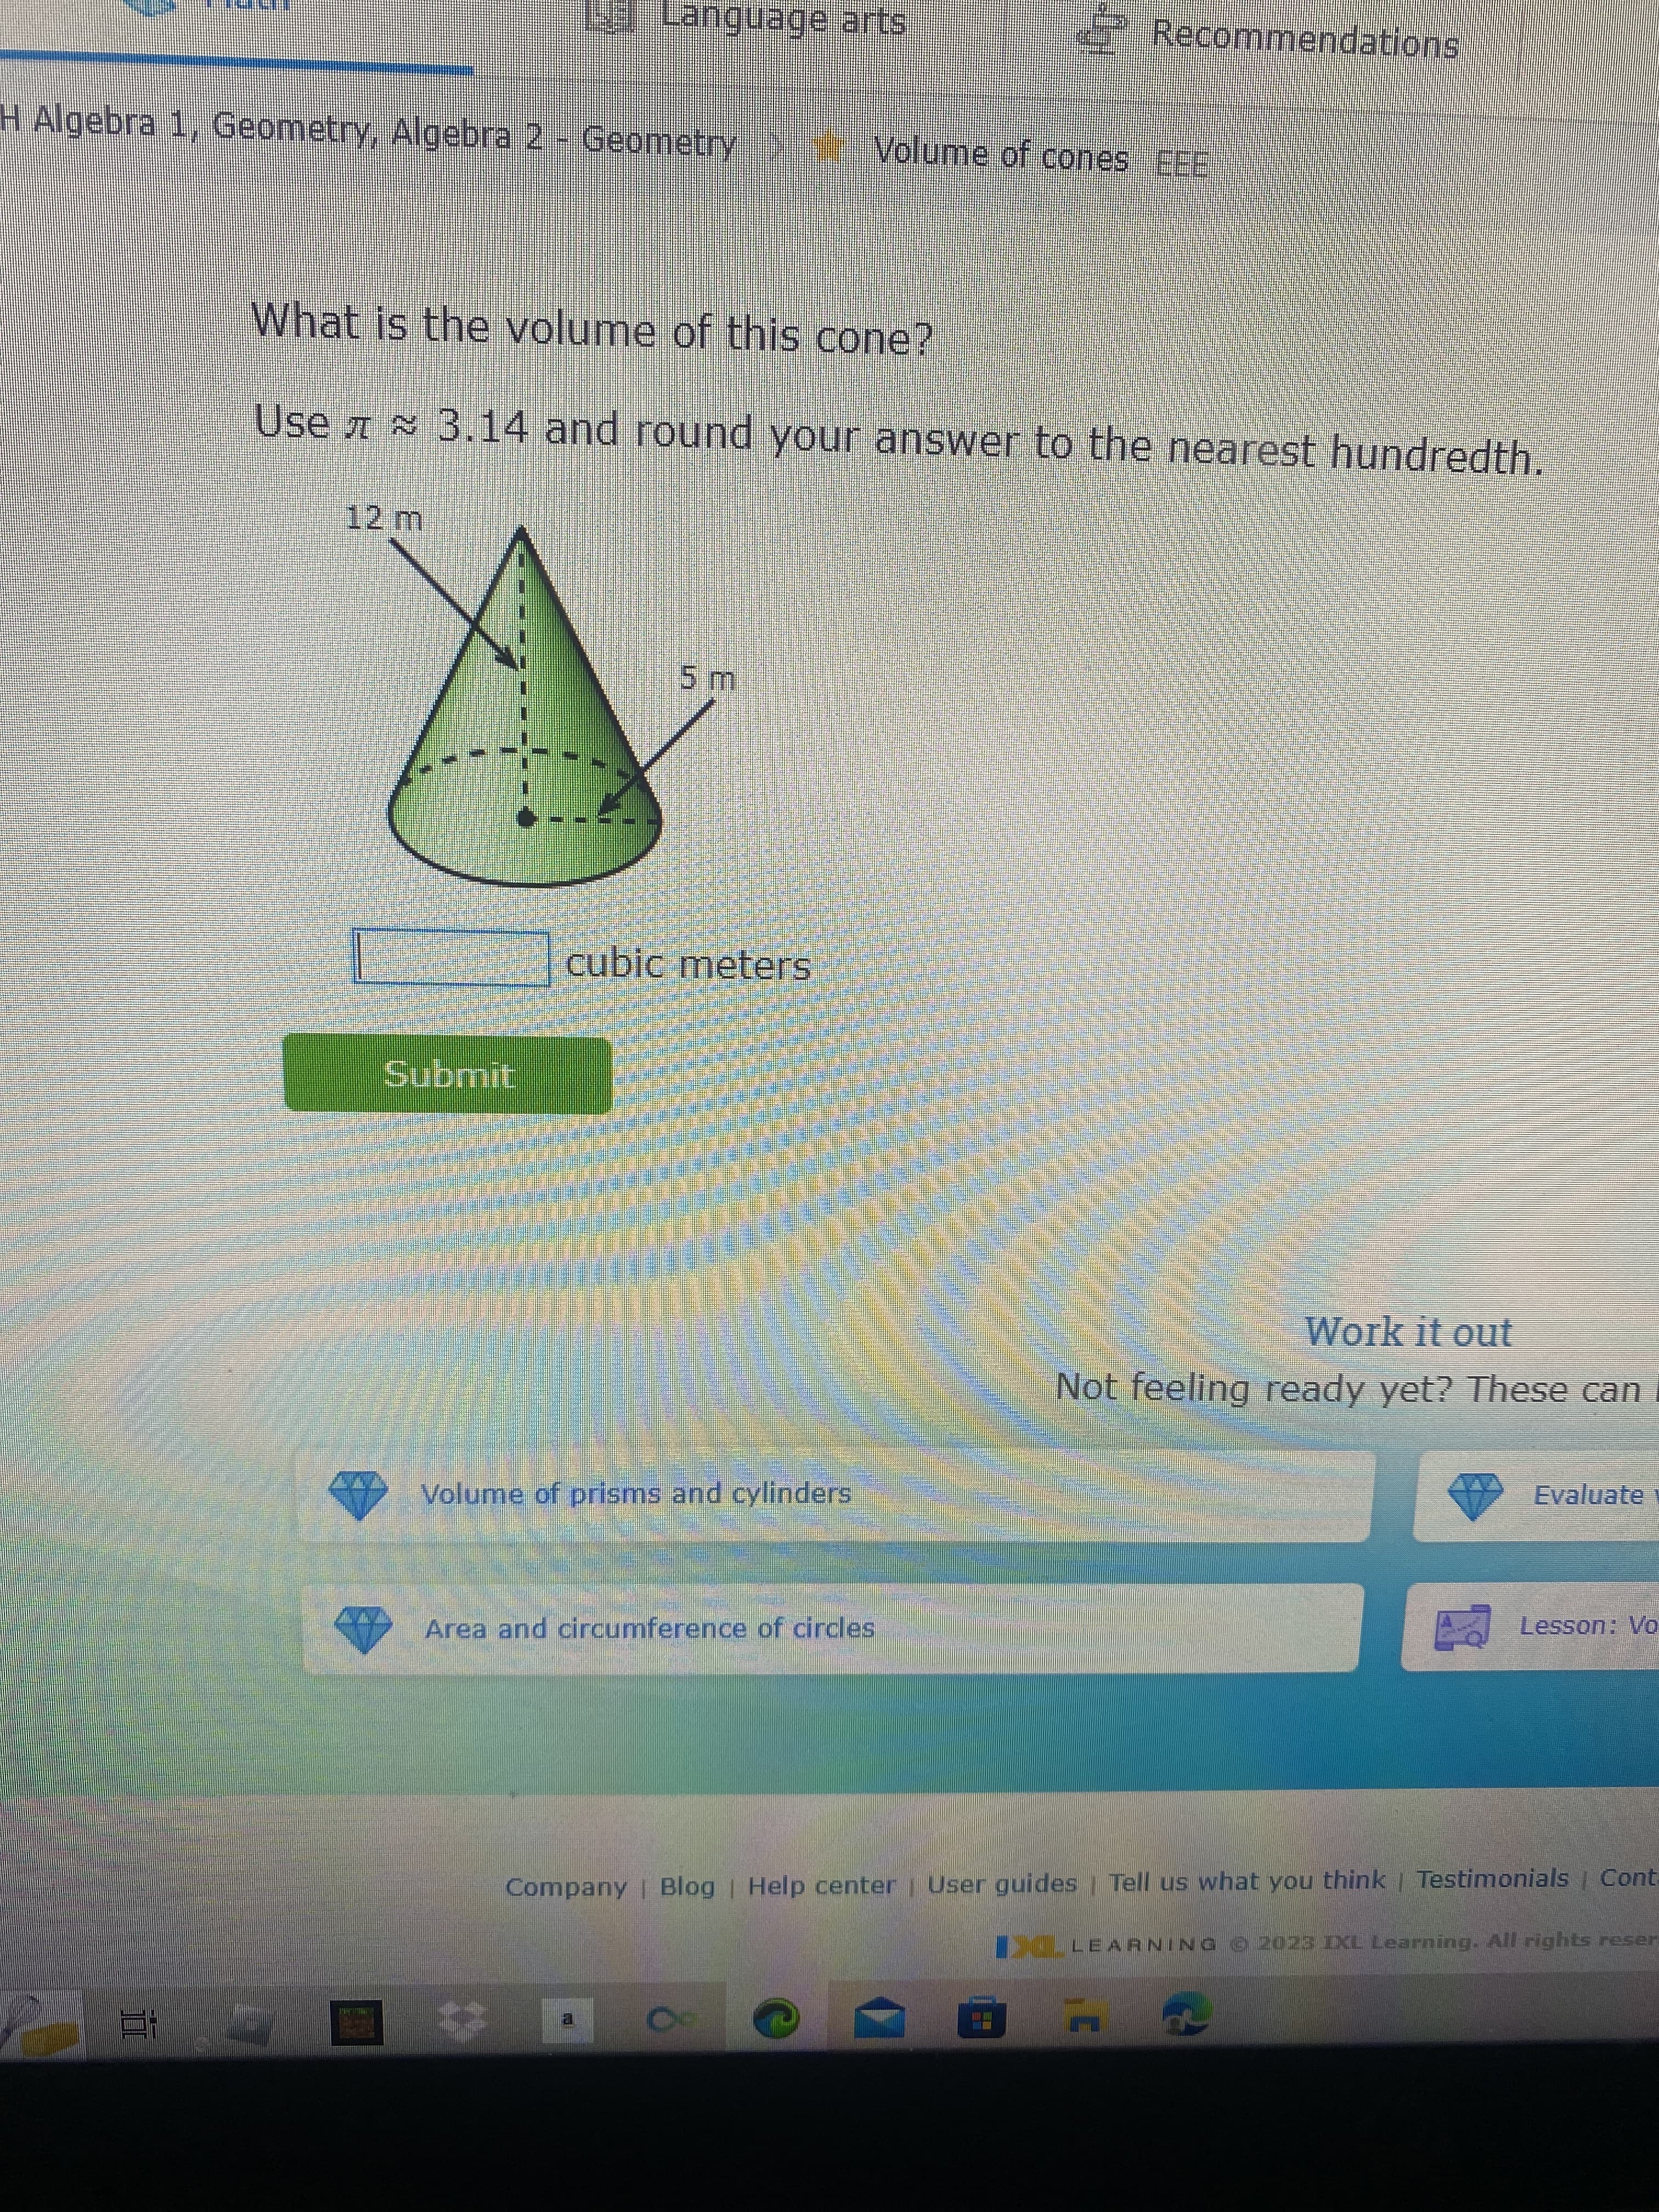 12 m
Language arts
H Algebra 1, Geometry, Algebra 2 - Geometry > Volume of cones EEE
Submit
What is the volume of this cone?
Use 3.14 and round your answer to the nearest hundredth.
5 m
cubic meters
Volume of prisms and cylinders
$40
Area and circumference of circles
3
Recommendations
Work it out
Not feeling ready yet? These can
Evaluate
Company | Blog | Help center | User guides | Tell us what you think | Testimonials | Cont-
CLEARNING © 2023 IXL Learning. All rights reser
q
Lesson: Vo